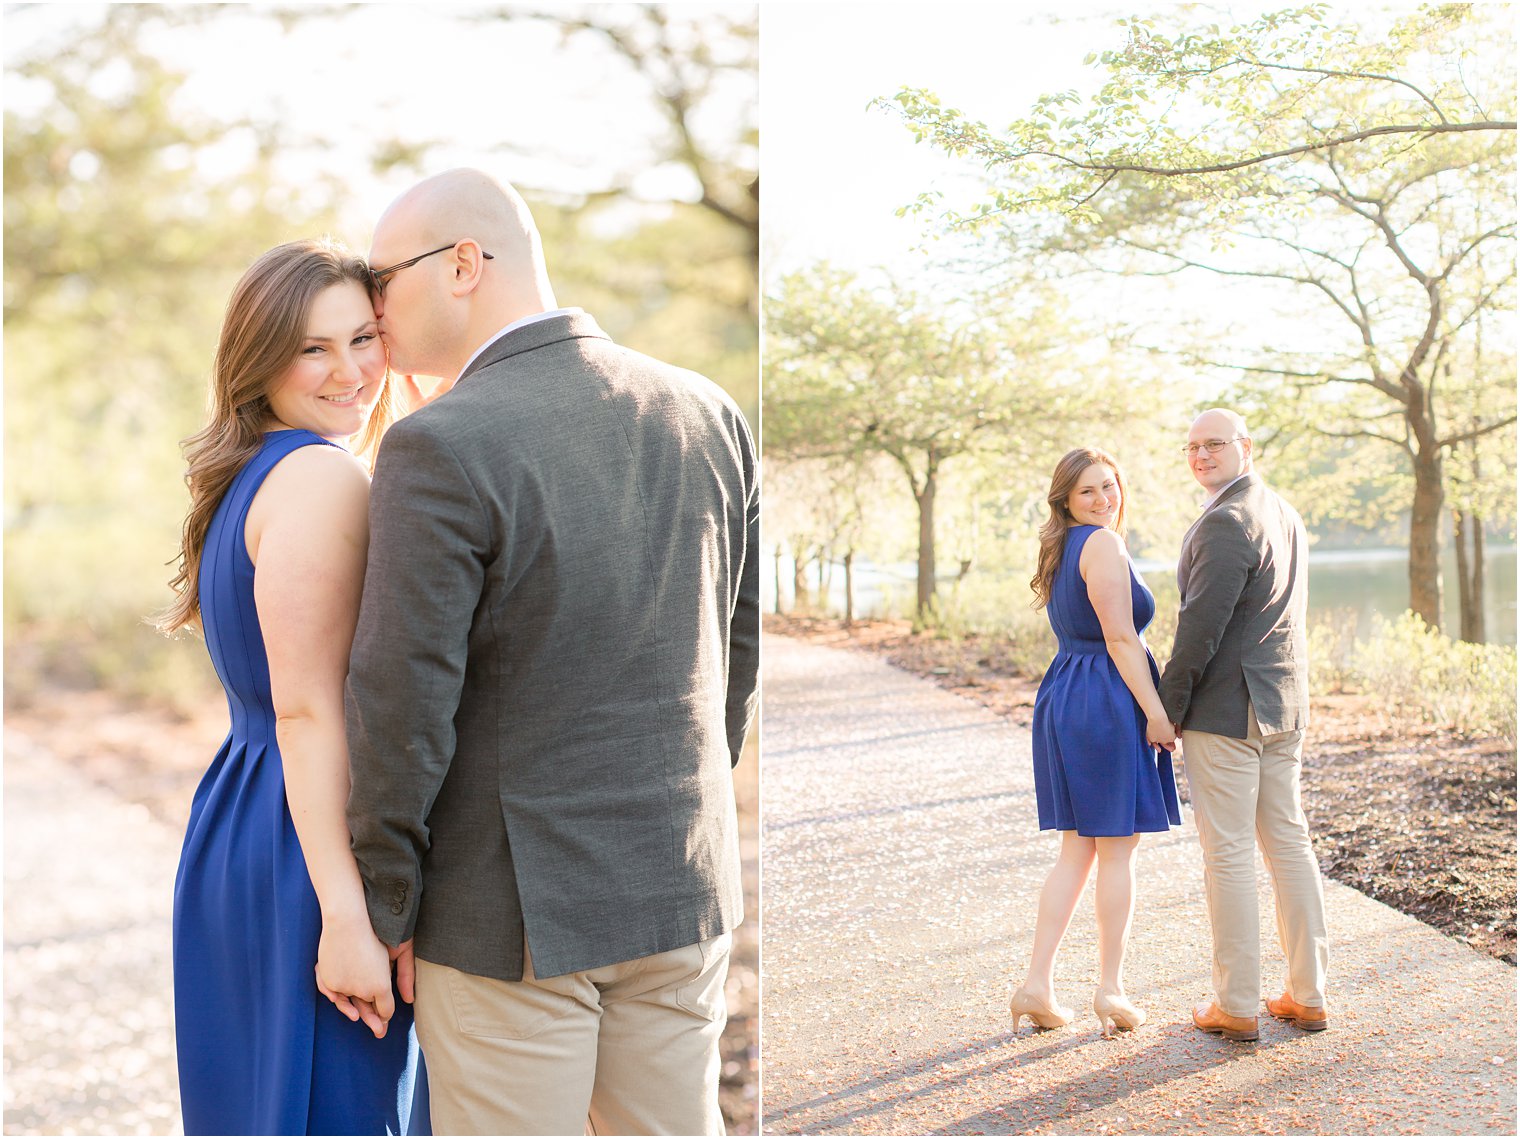 Spring engagement photos with blooming trees